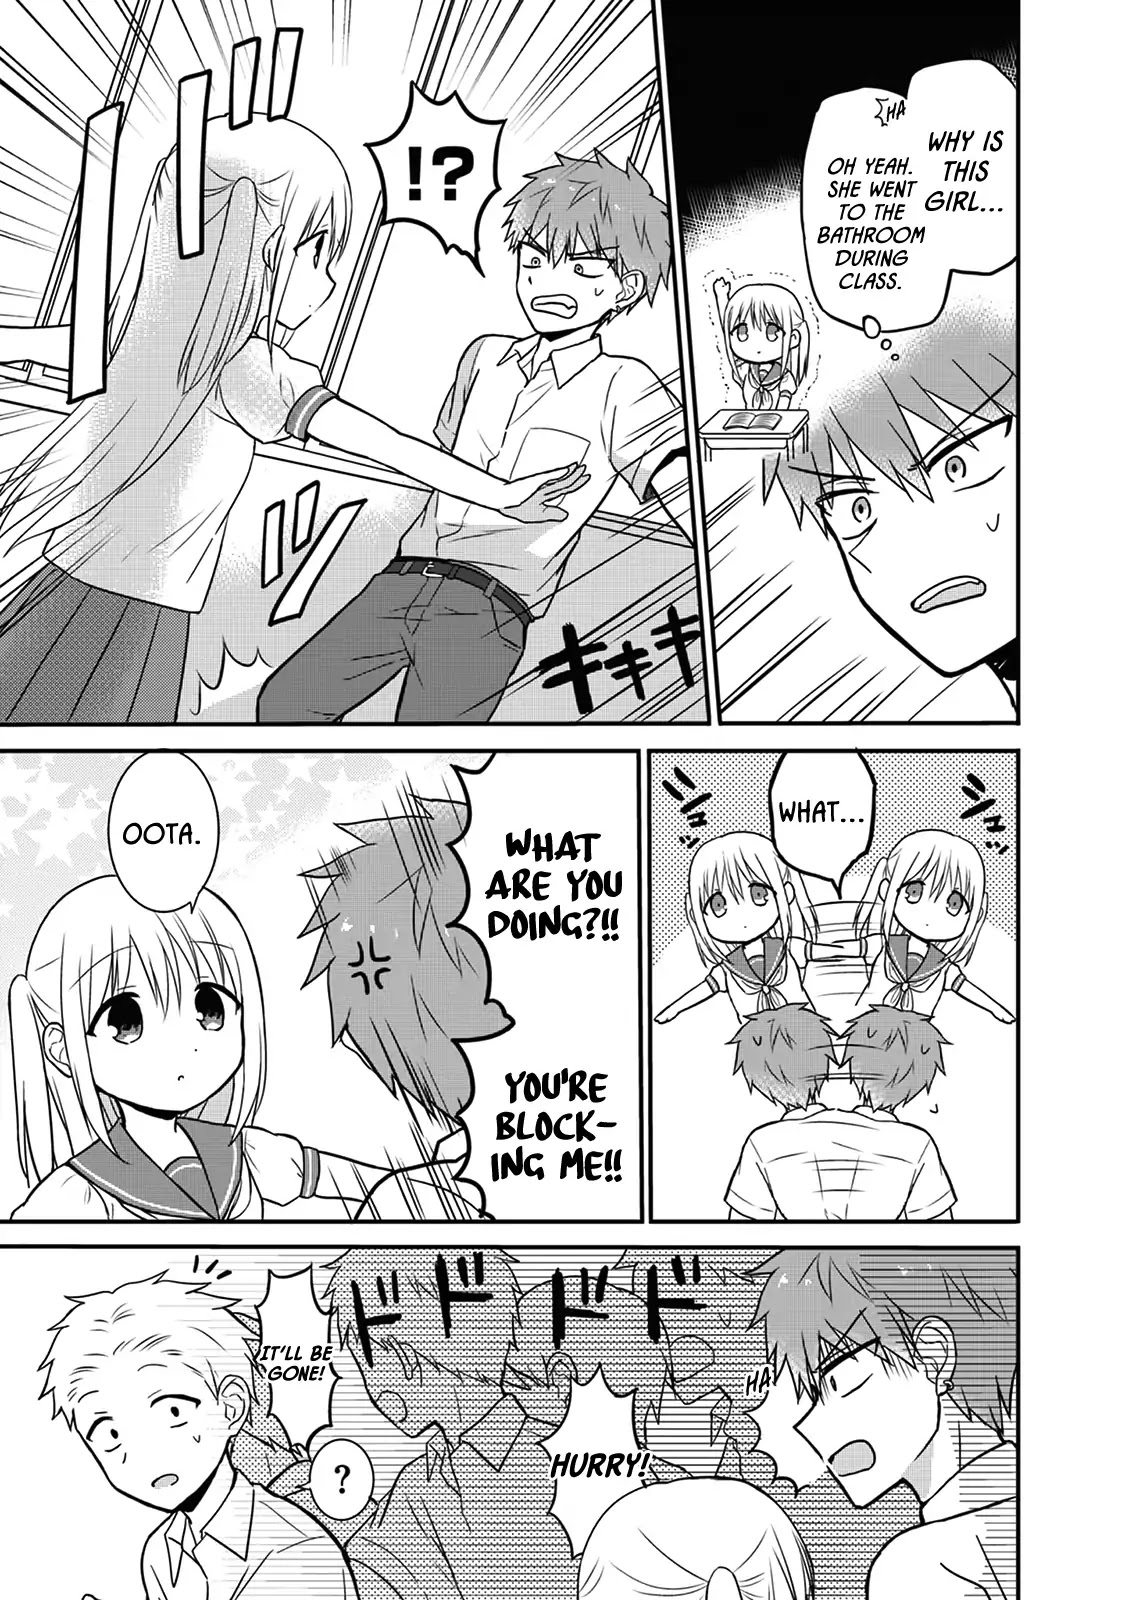 Expressionless Face Girl and Emotional Face Boy Chapter 6: Oota-kun's Lunch